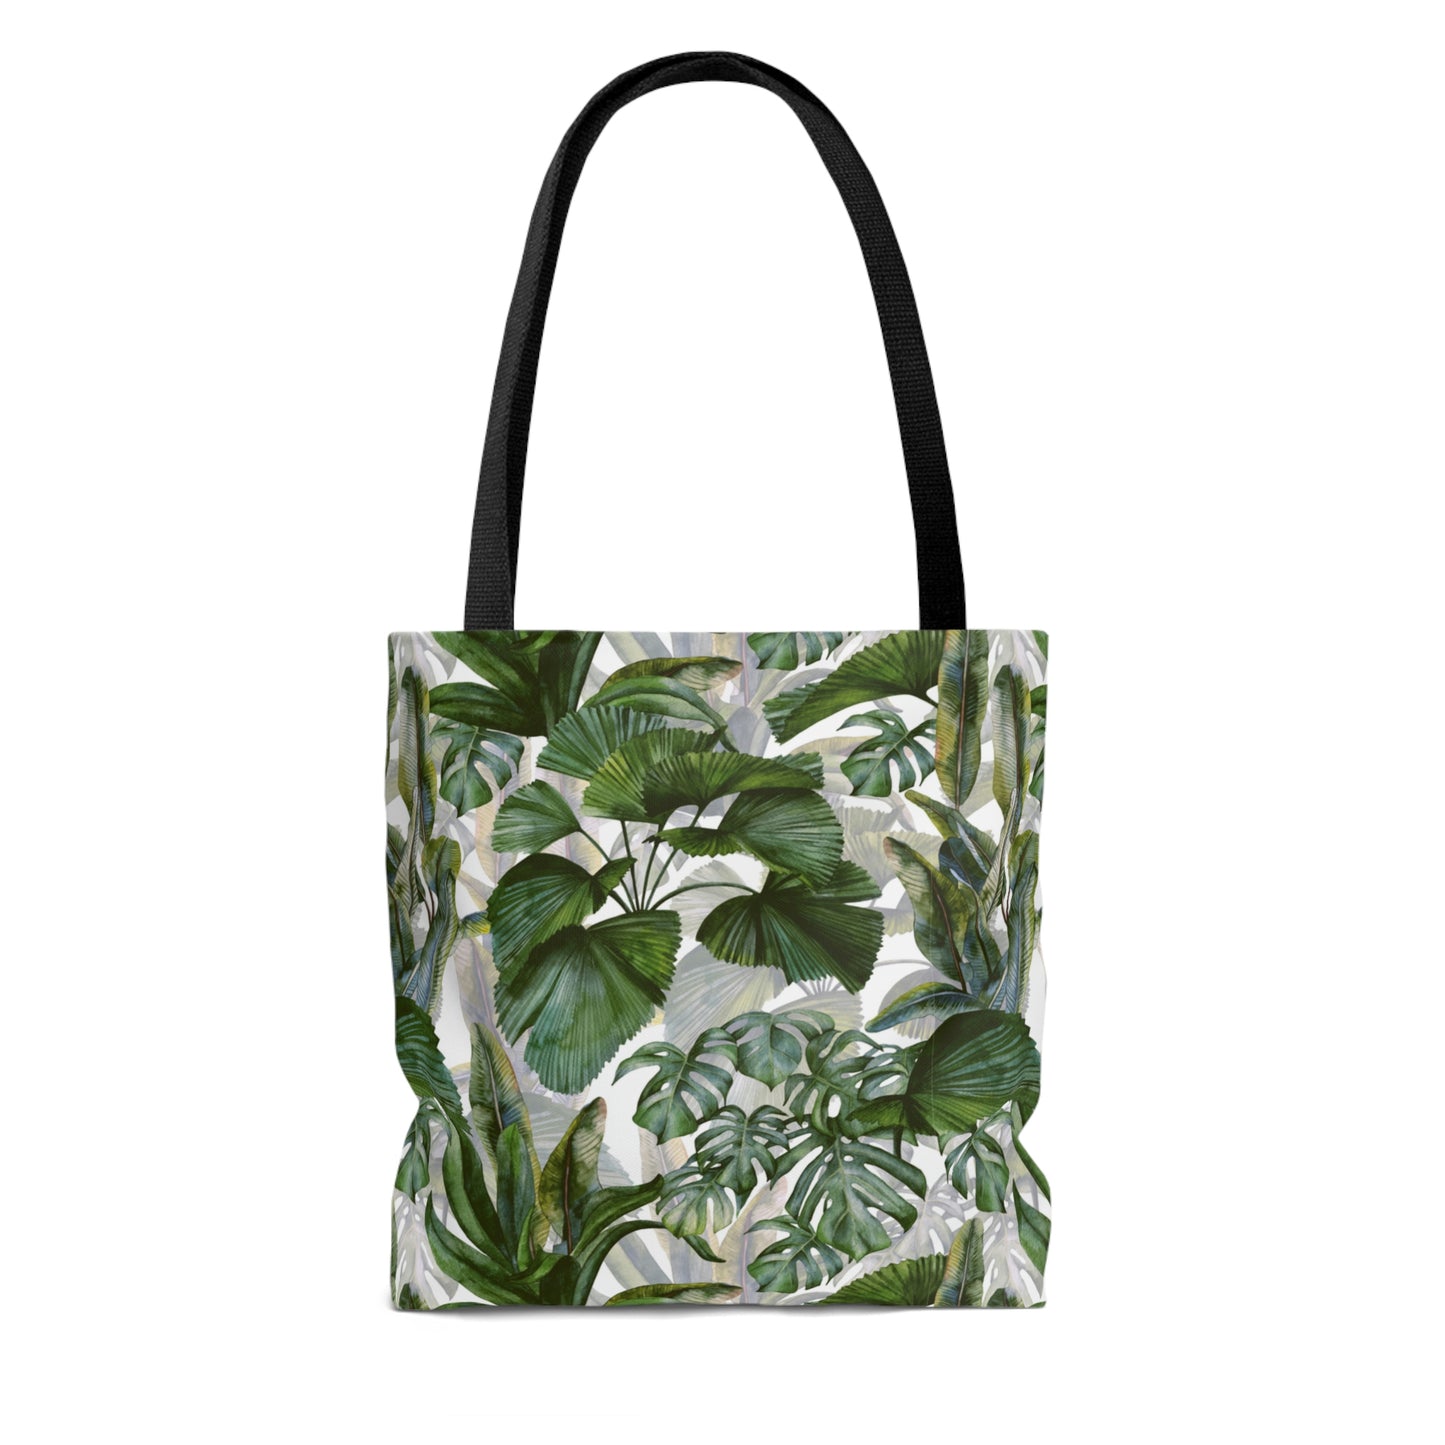 Plant lover bag. Plant Tote Bag. Gift for plant mom, plant lady or plant lover. Plant themed bag. Library bag with plants.